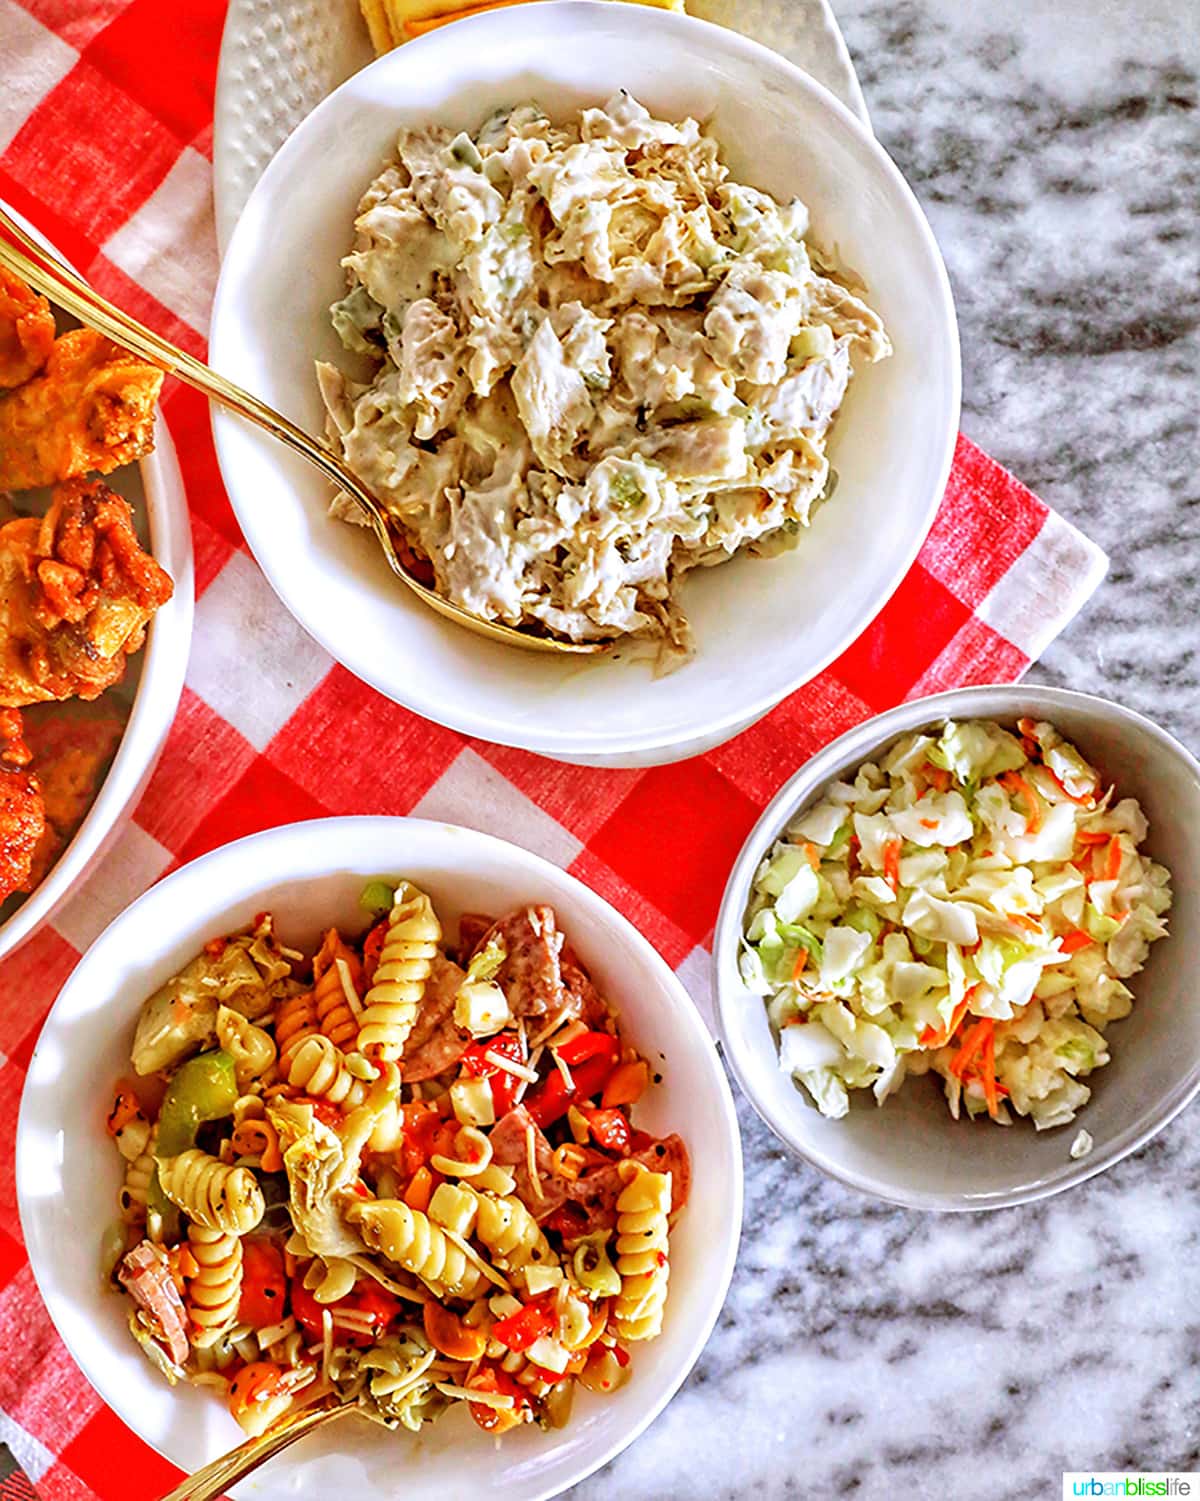 chicken salad, pasta salad, coleslaw in bowls against red and white checkered tablecloth